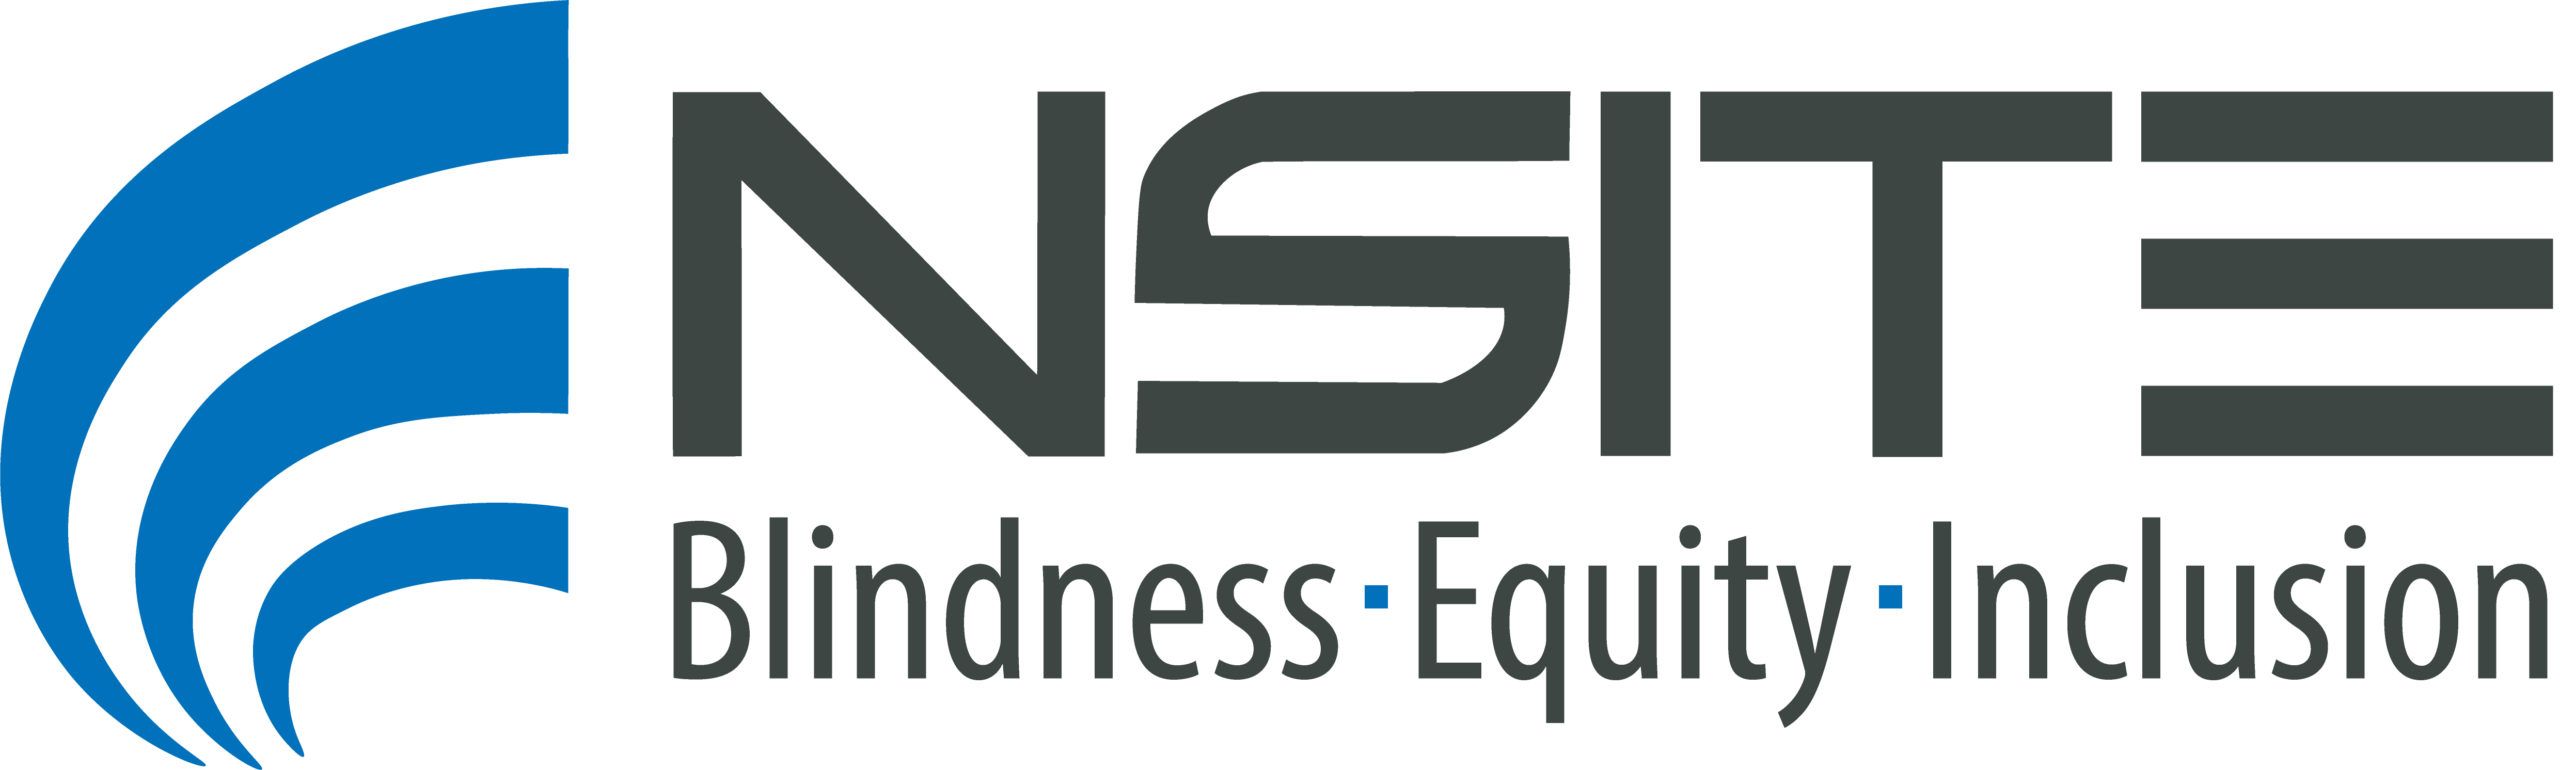 NSITE logo with Blindness Equity Inclusion underneath